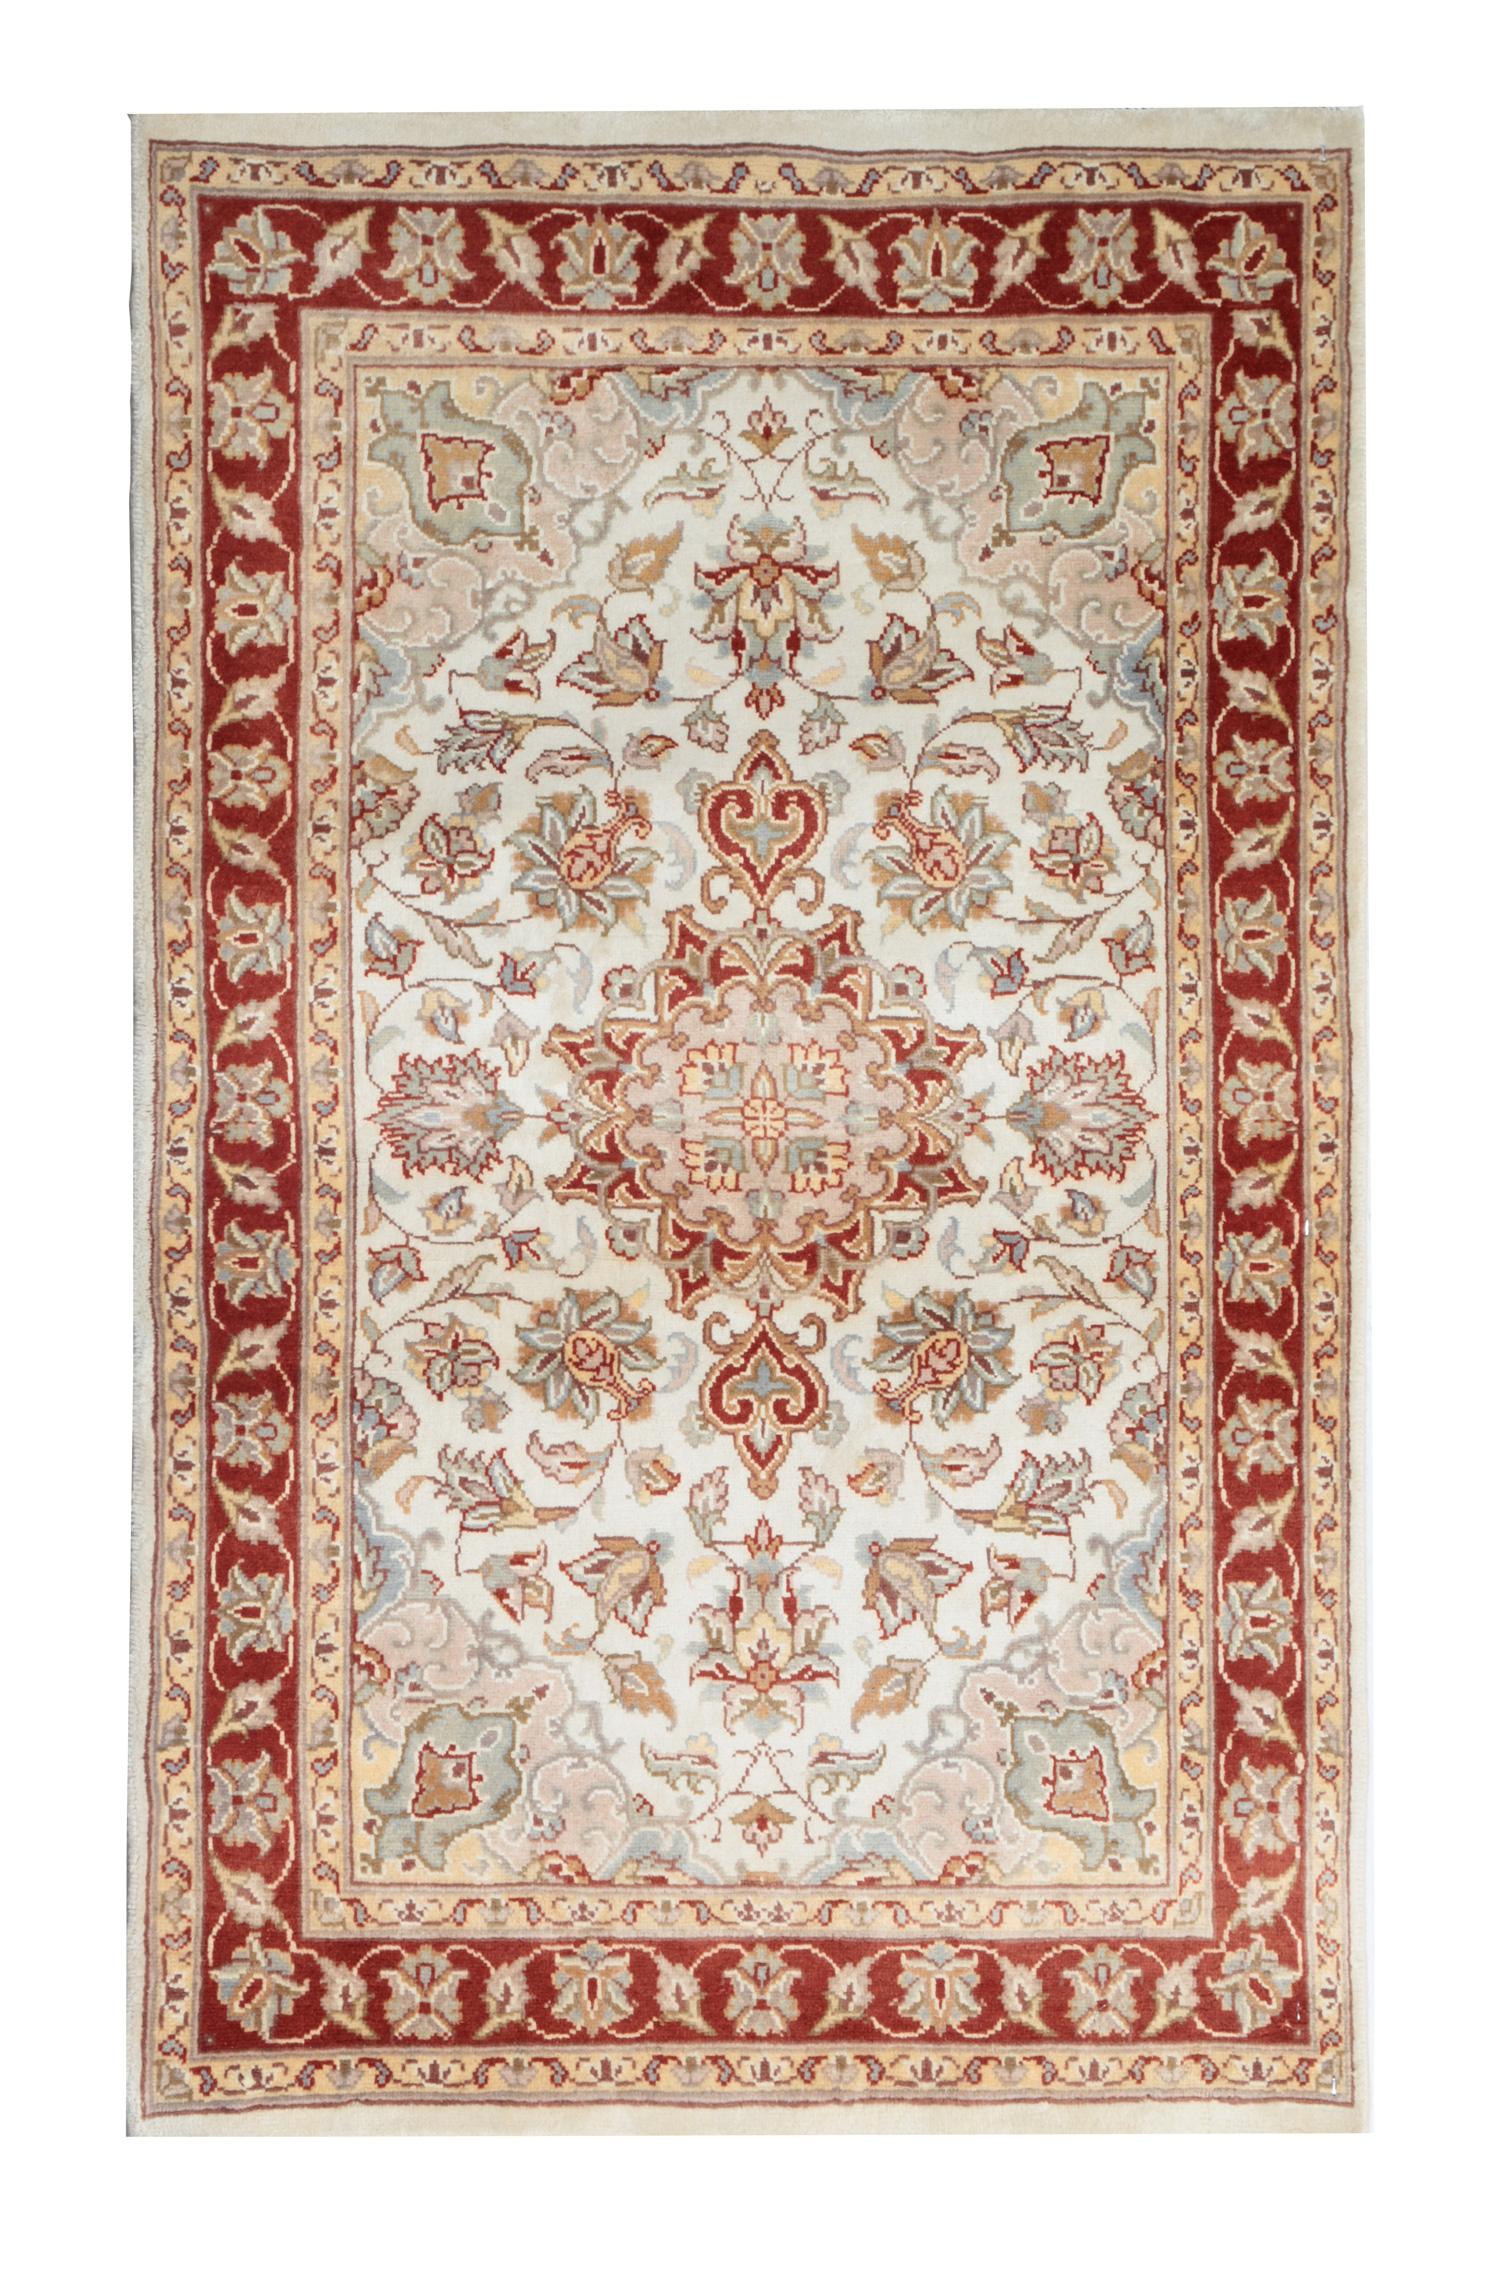 This handwoven Indian rug is a Ziegler Sultanabad carpet rug made on our looms by our master weavers in India. These handmade rugs have been made with all-natural veg dyes and hand-spun wool. The large-scale design makes Sultanabad wool rugs